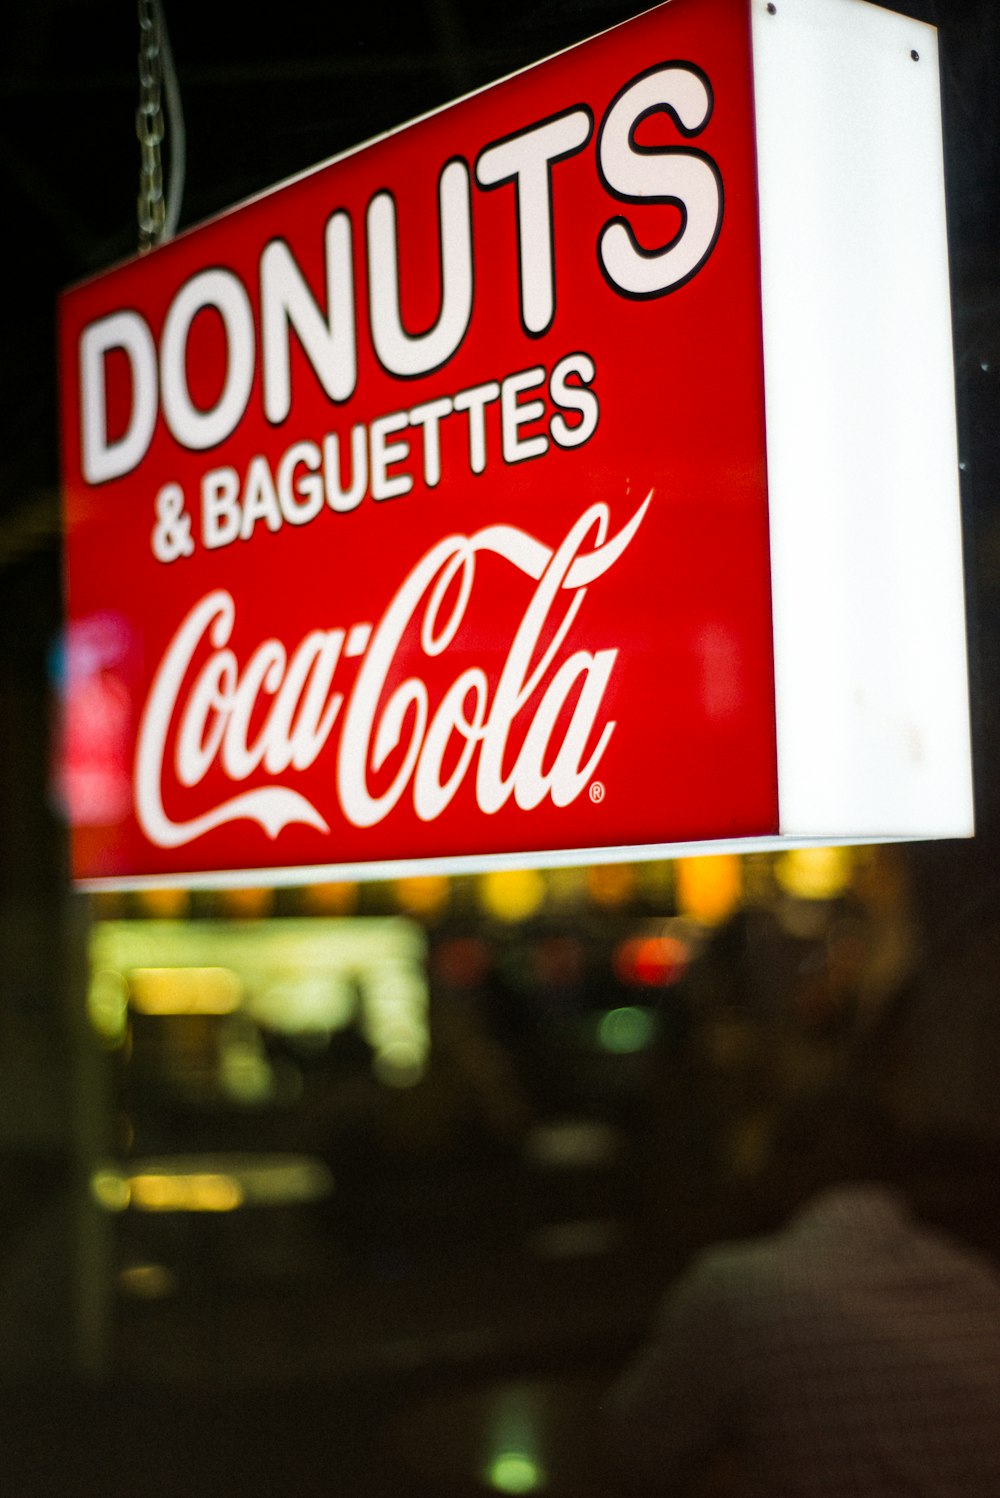 close photography of Donuts & Baguettes Coca-Cola signage